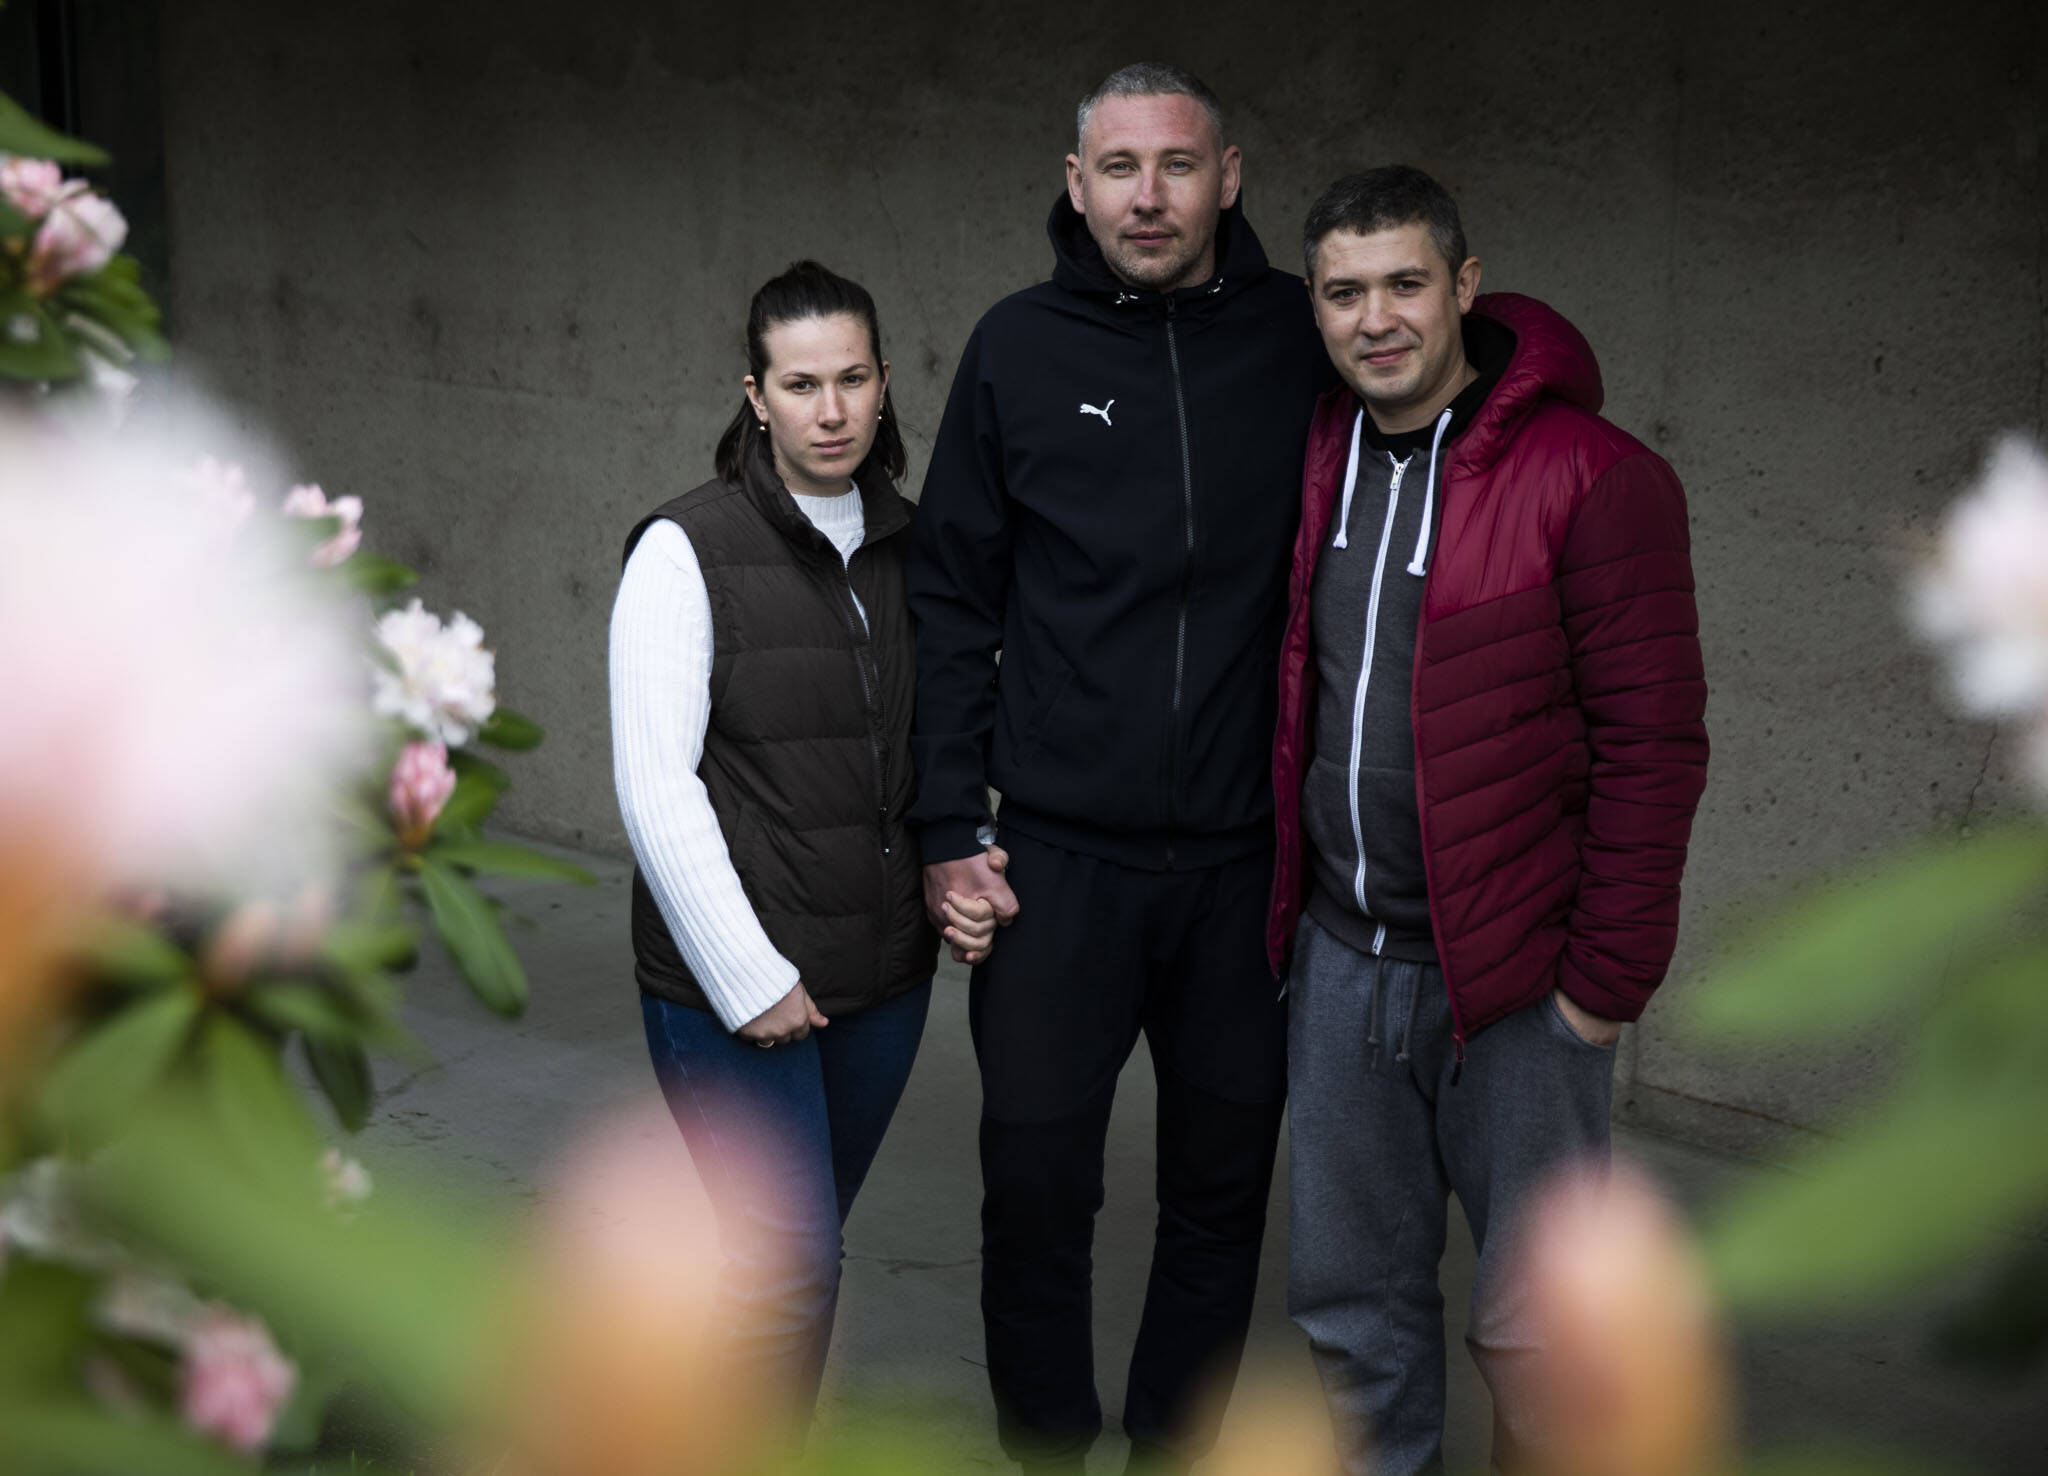 Nataliia Ktitorova (left), with her husband, Vitalii Ktitorov (center), and brother-in-law Yosip Lakatosh (right) at the Refugee & Immigrant Services Northwest office Thursday in Everett. (Olivia Vanni / The Herald)